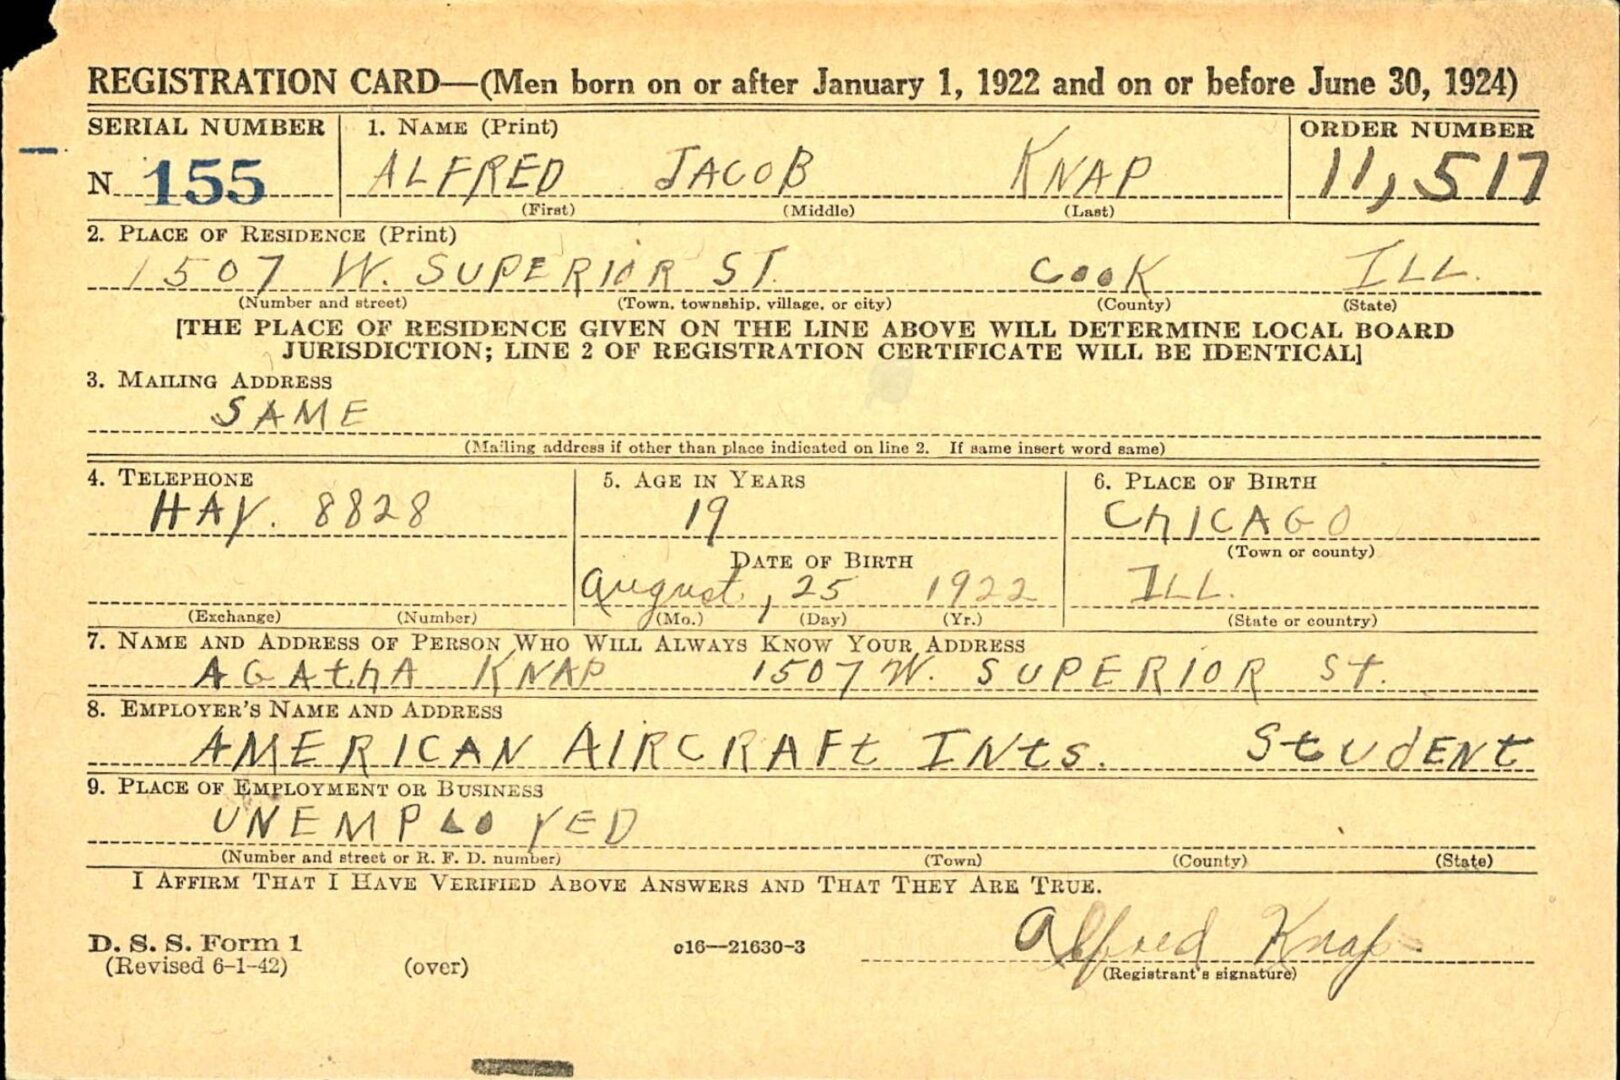 U.S. WWII Draft Card for Alfred Jacob Knap